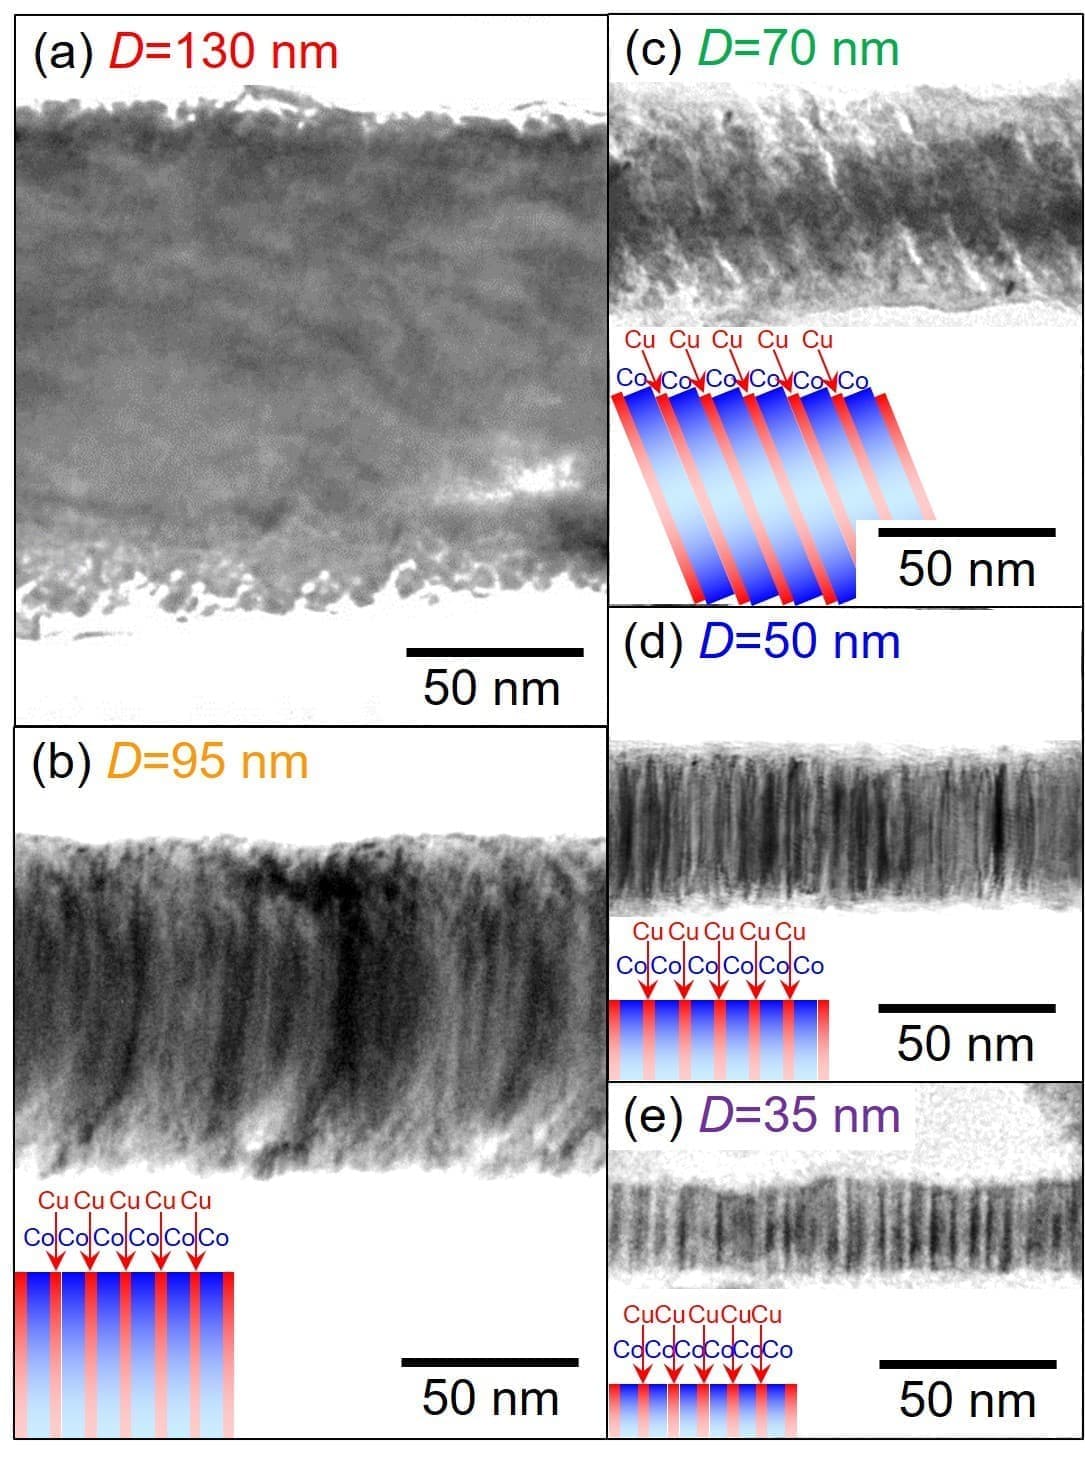 CPP-GMR Performance of Electrodeposited Metallic Multilayered Nanowires with a Wide Range of Aspect Ratios